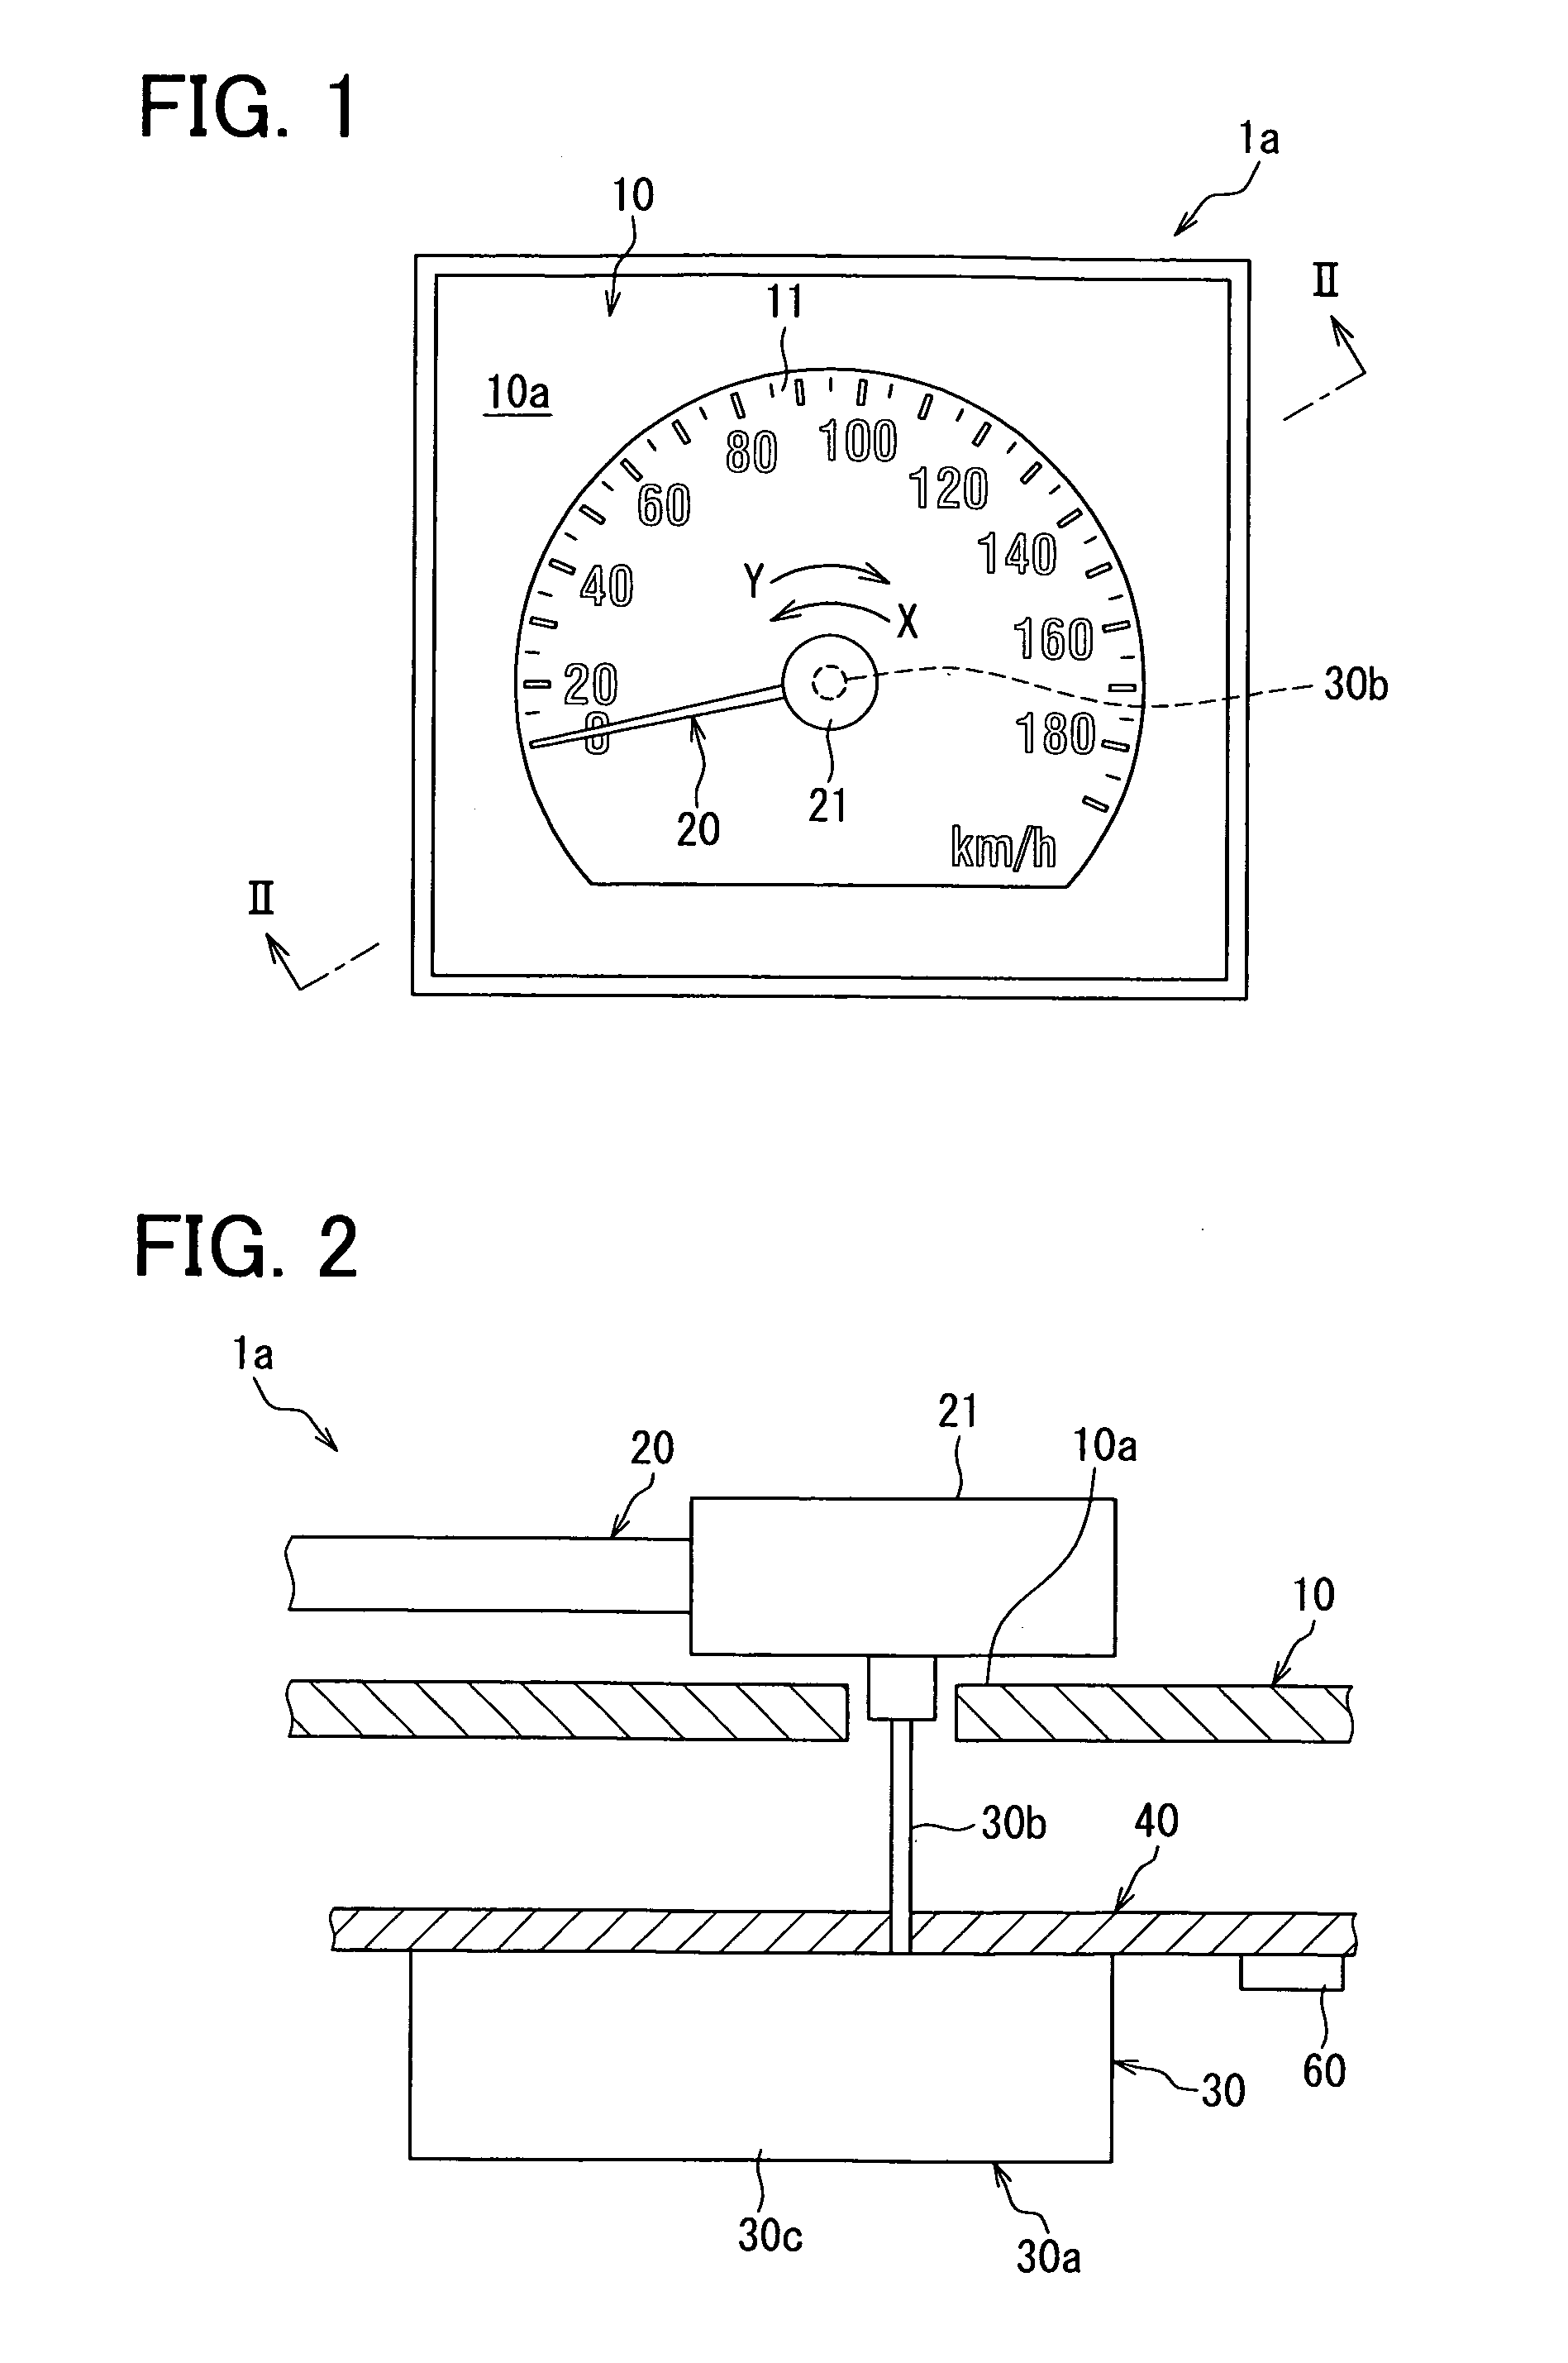 Meter system with indicator for vehicle